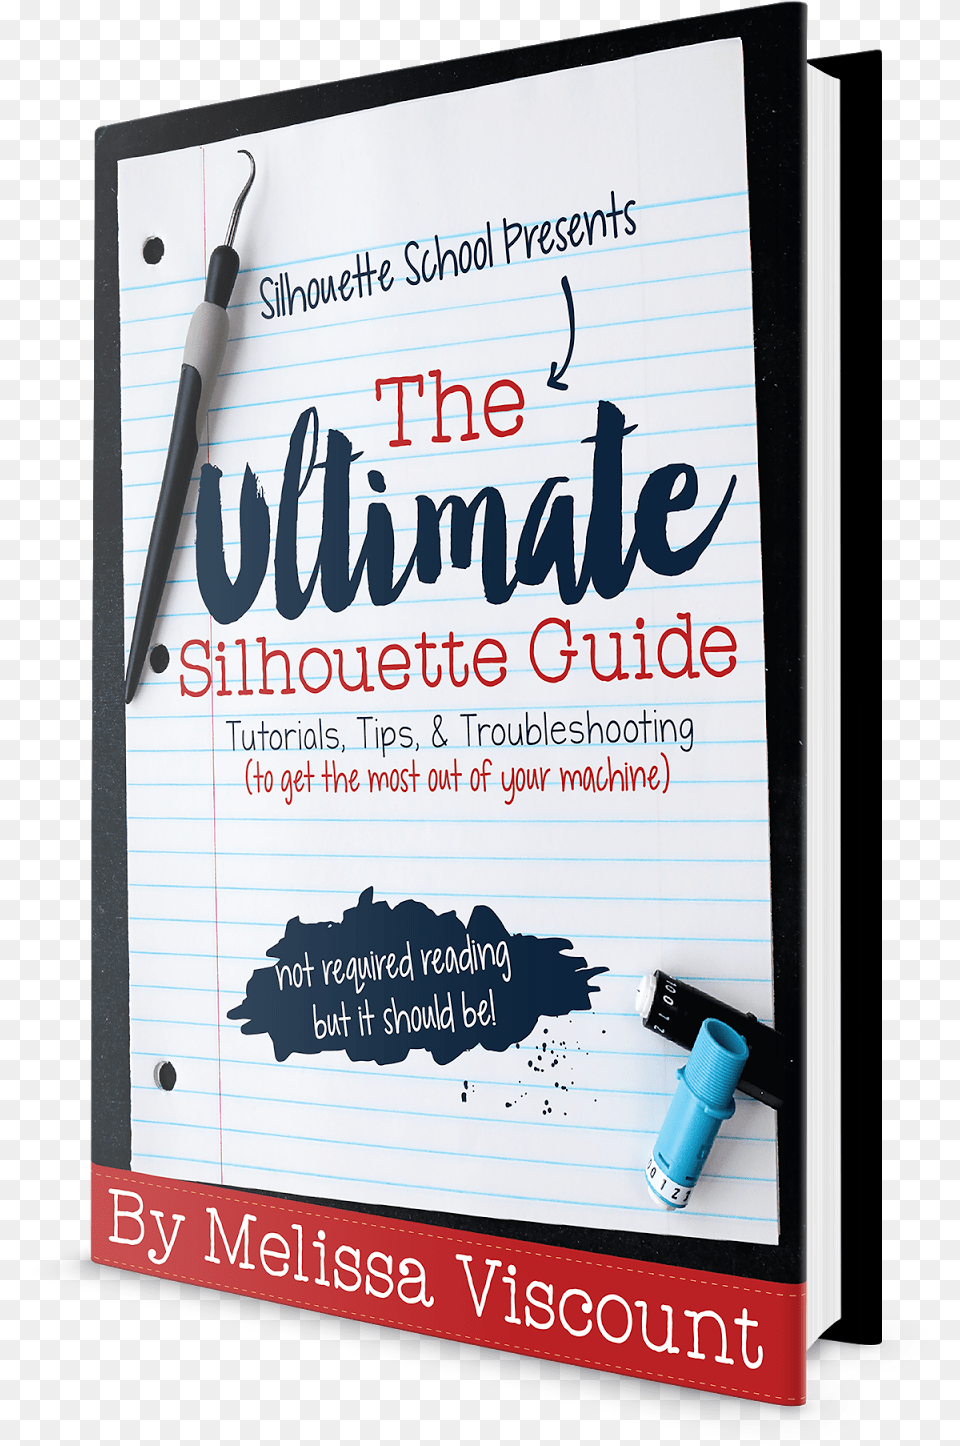 Silhouette School Books Ultimate Silhouette Guide By Silhouette School Studio, Advertisement, Poster, Text Png